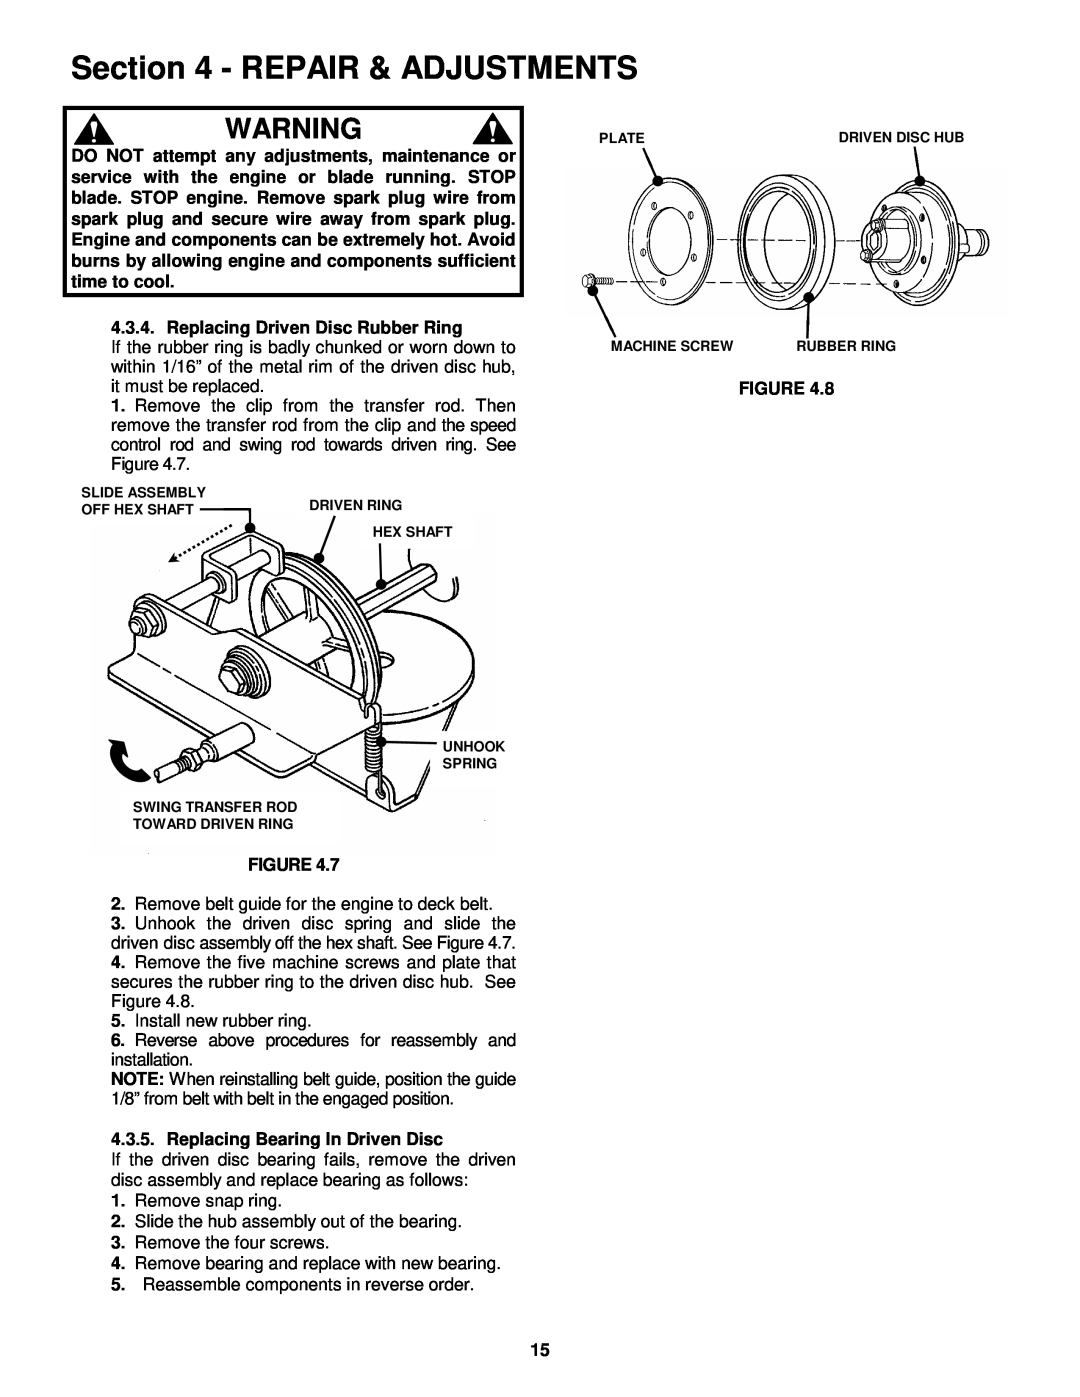 Snapper HWPS26600RV important safety instructions Repair & Adjustments, Remove belt guide for the engine to deck belt 